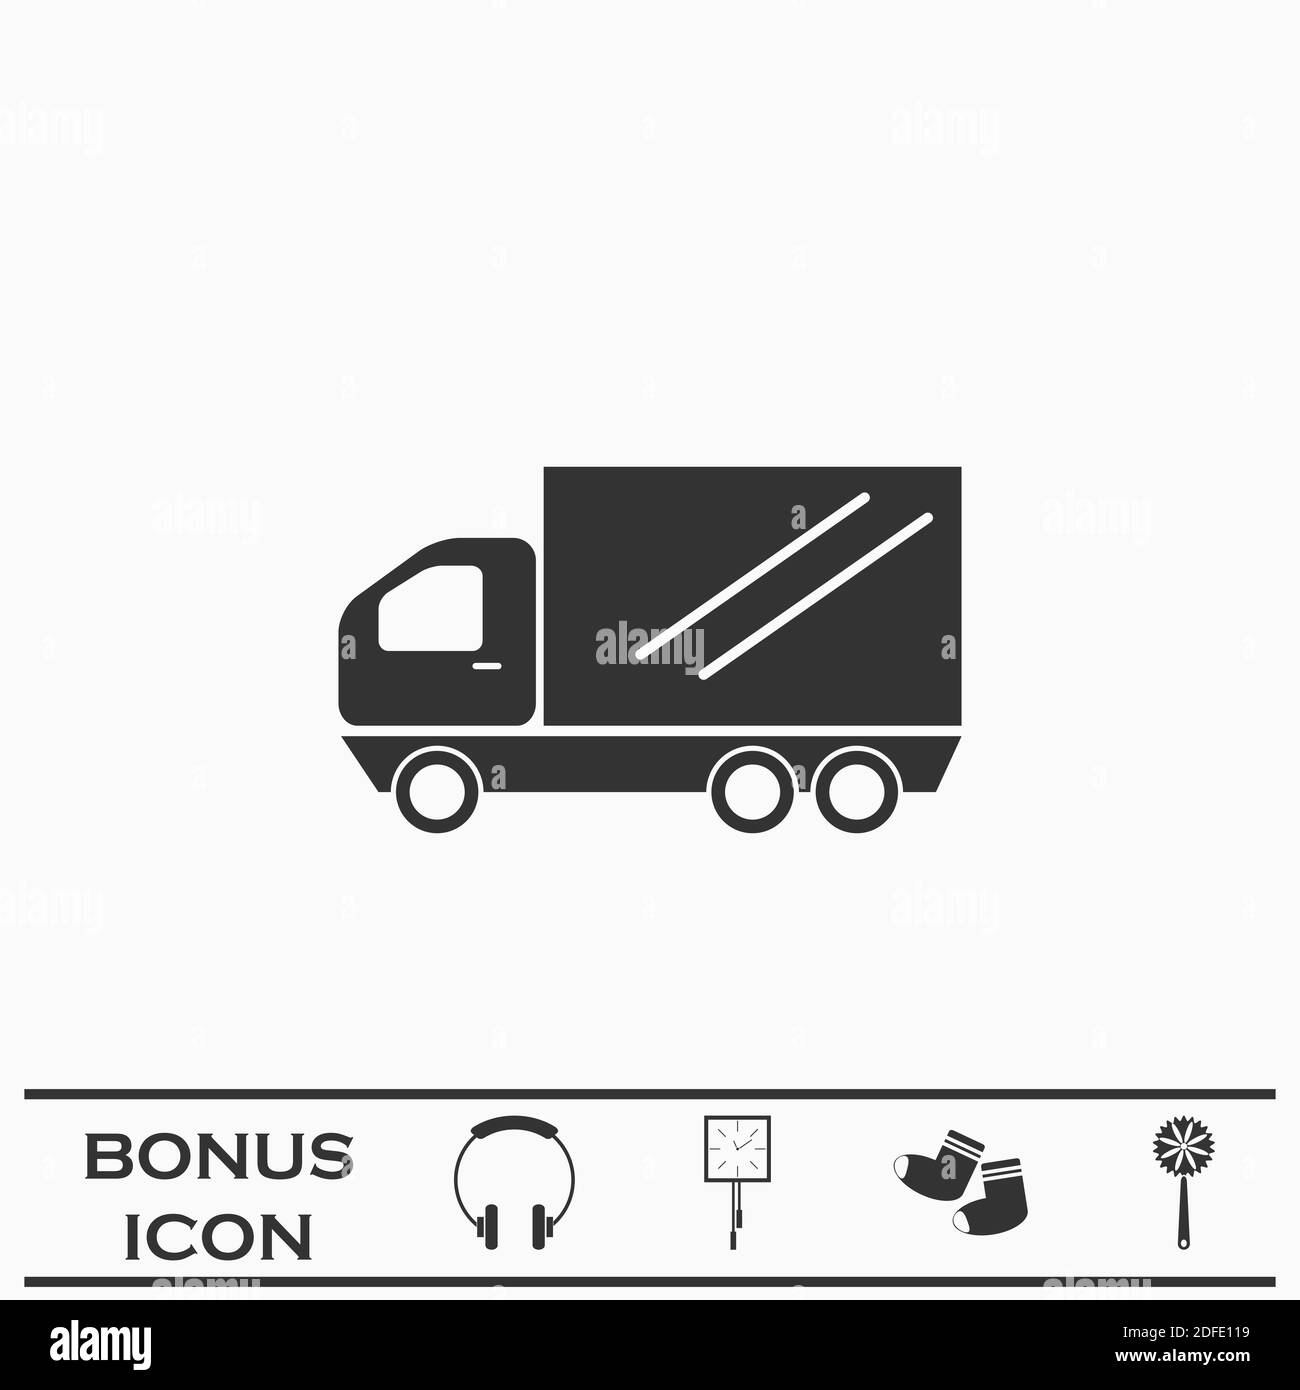 transport truck clipart black and white school